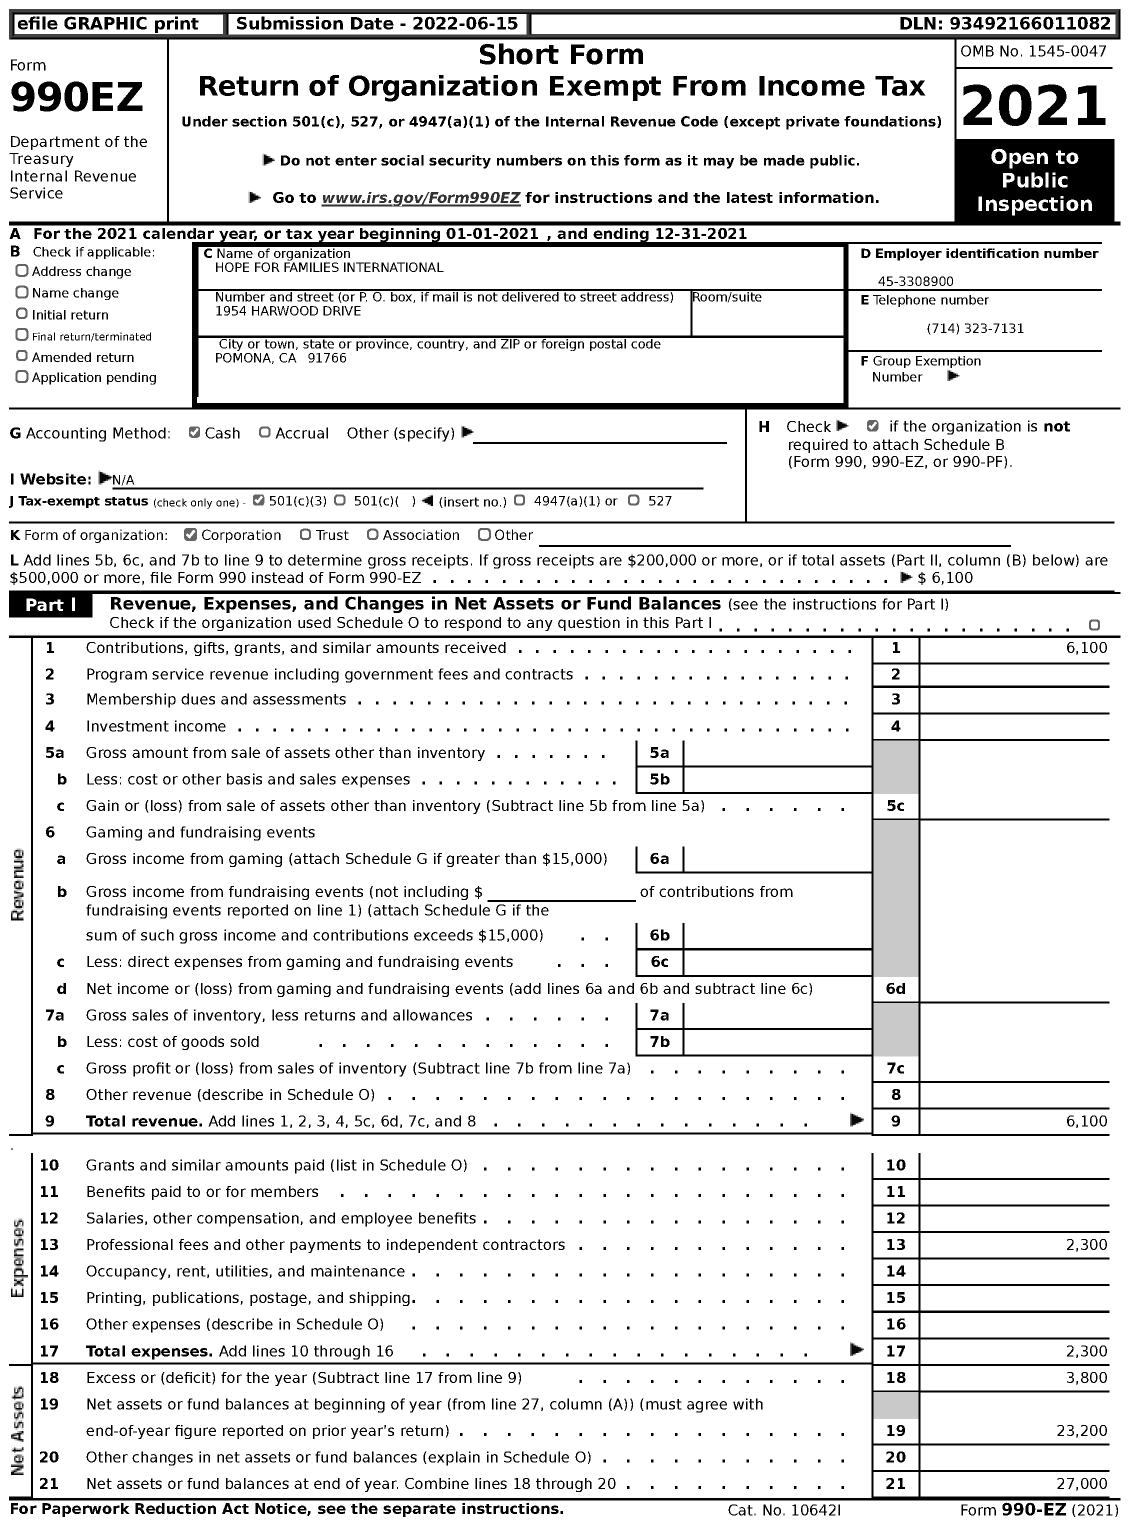 Image of first page of 2021 Form 990EZ for Hope for Families International